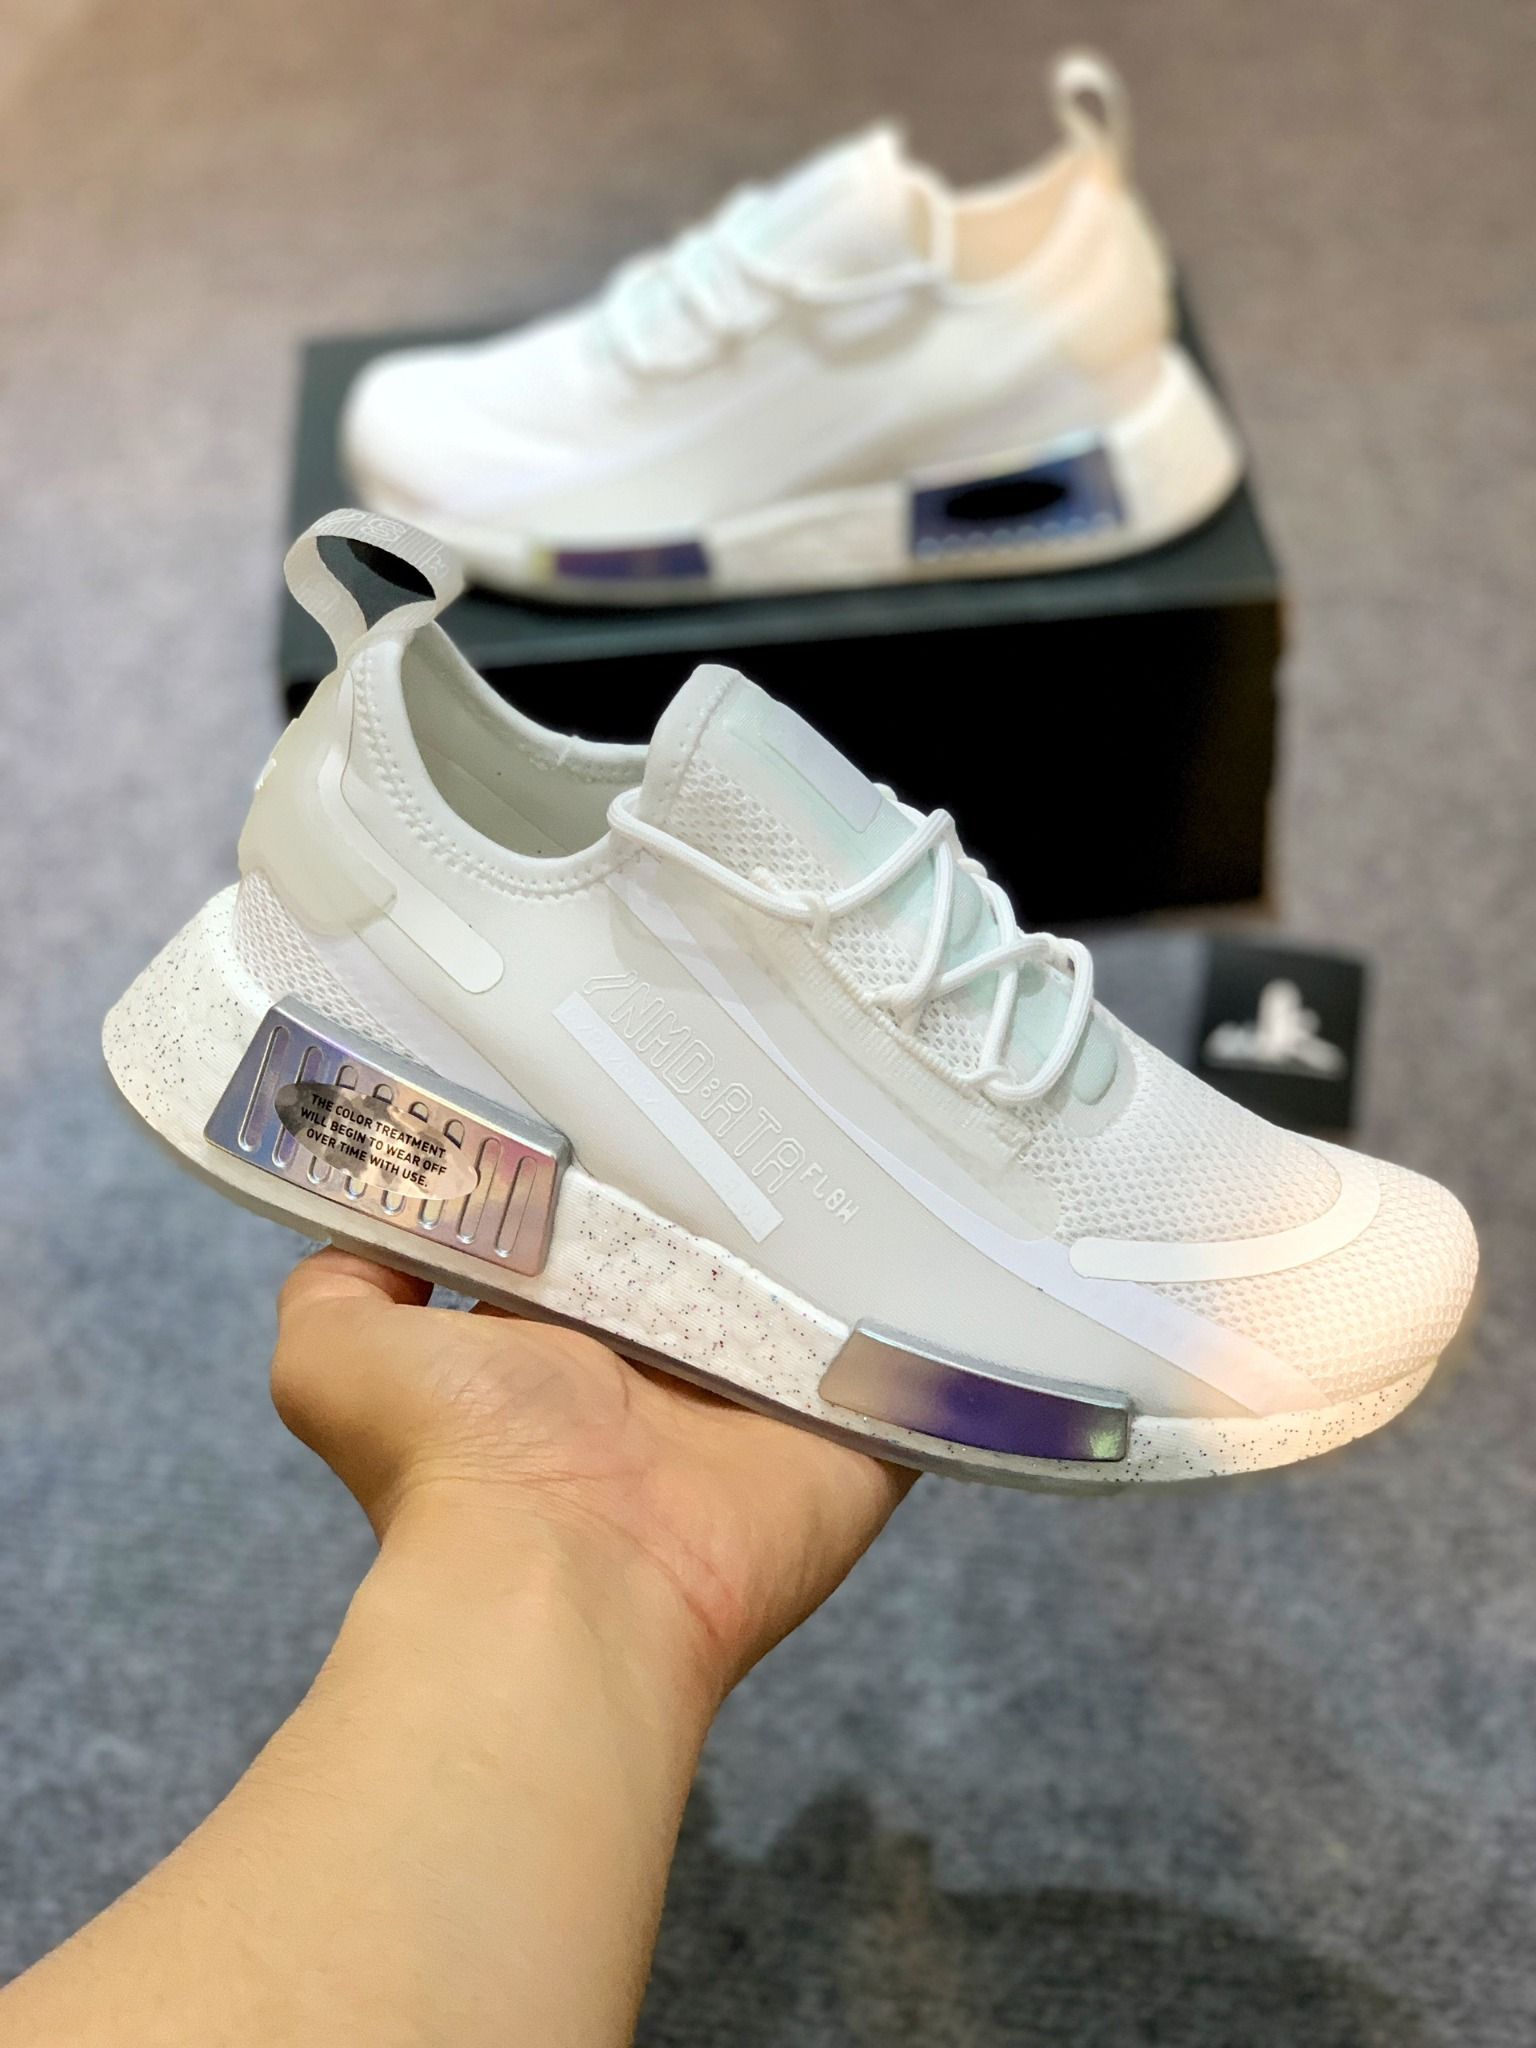 GZ9289 NMD R1 Spectoo White Iridescent – Weirdkos Sneakers